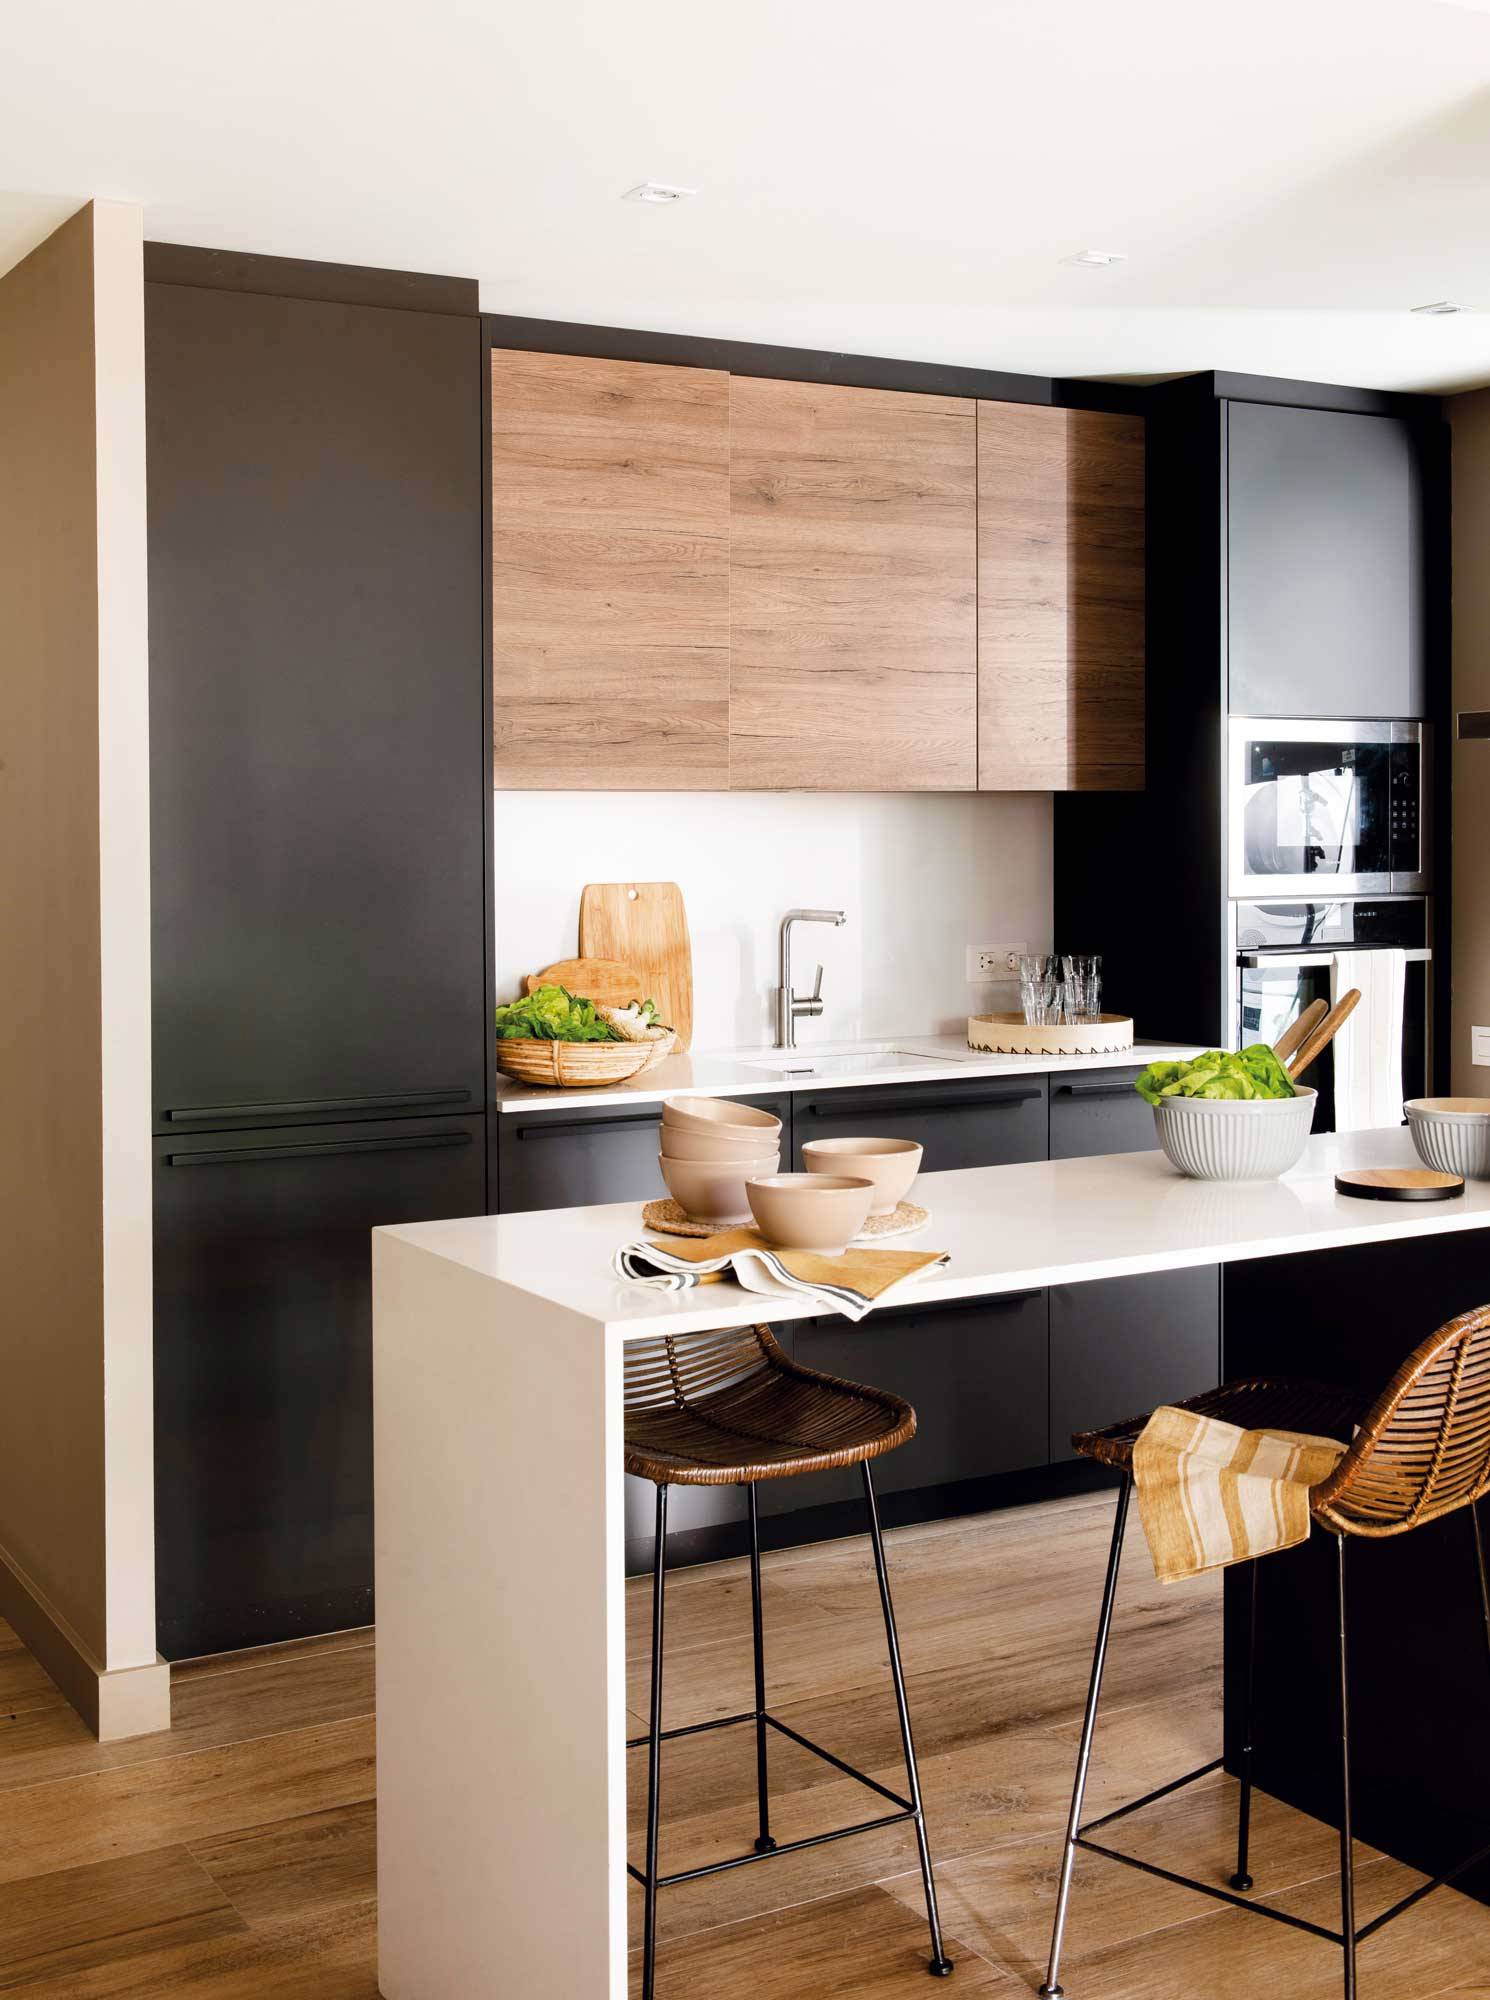 Small kitchen with furniture in wood and black.  